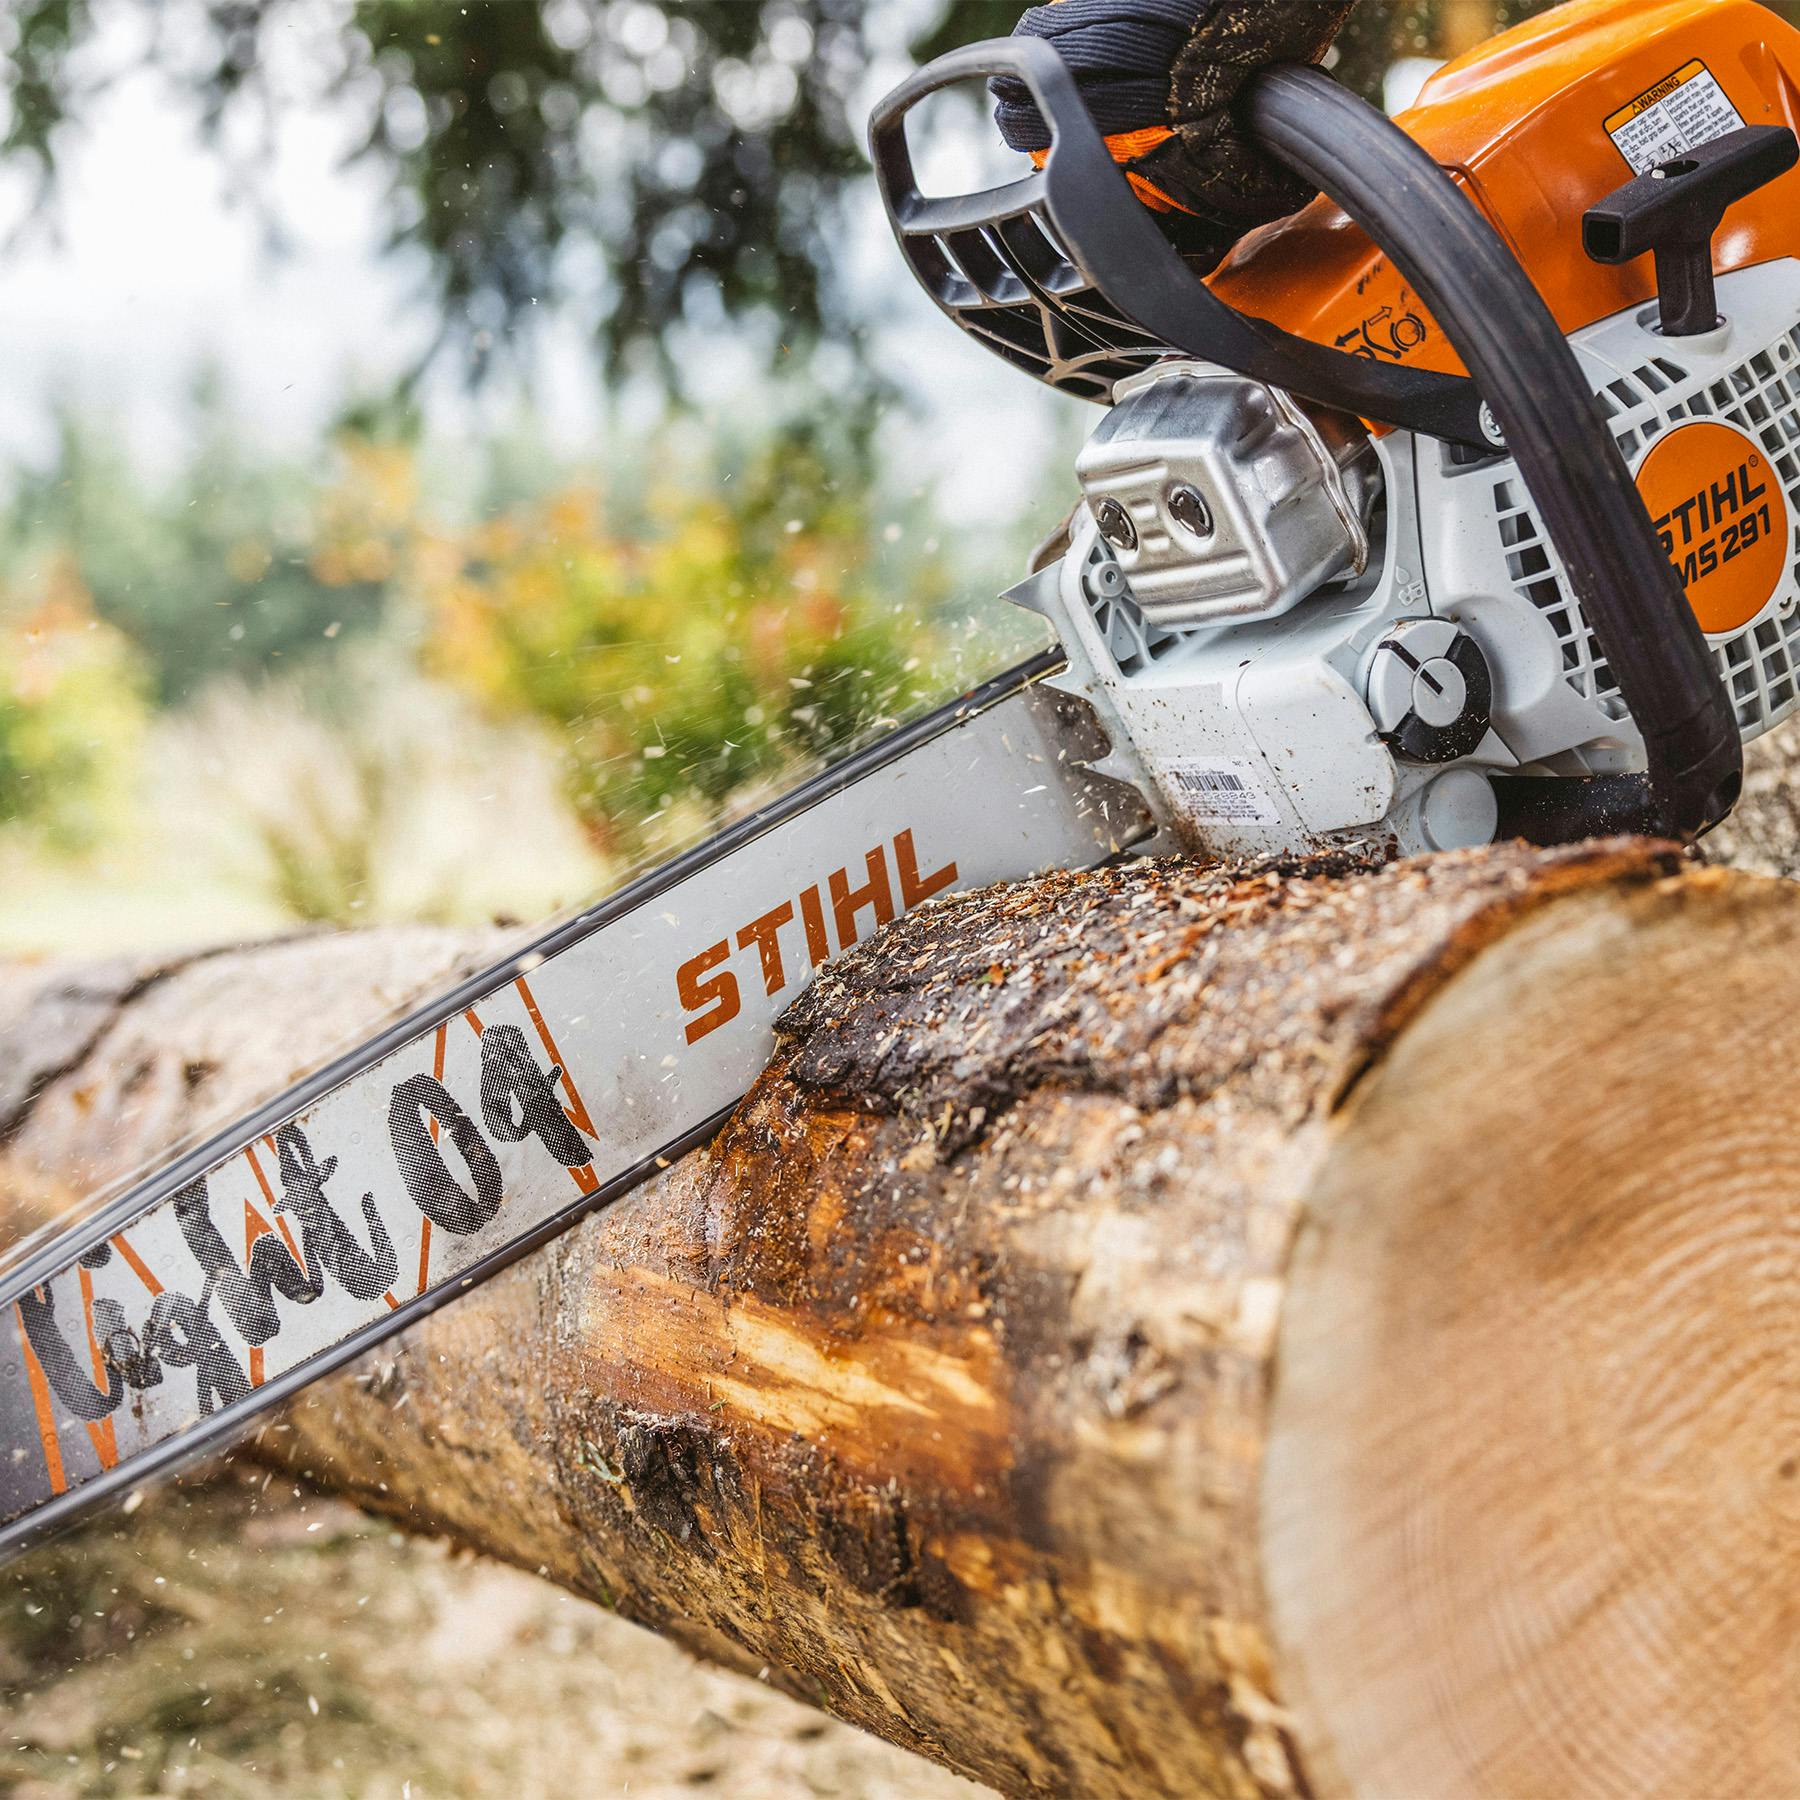 Our Wallpaper for more STIHL on your screen | STIHL | STIHL